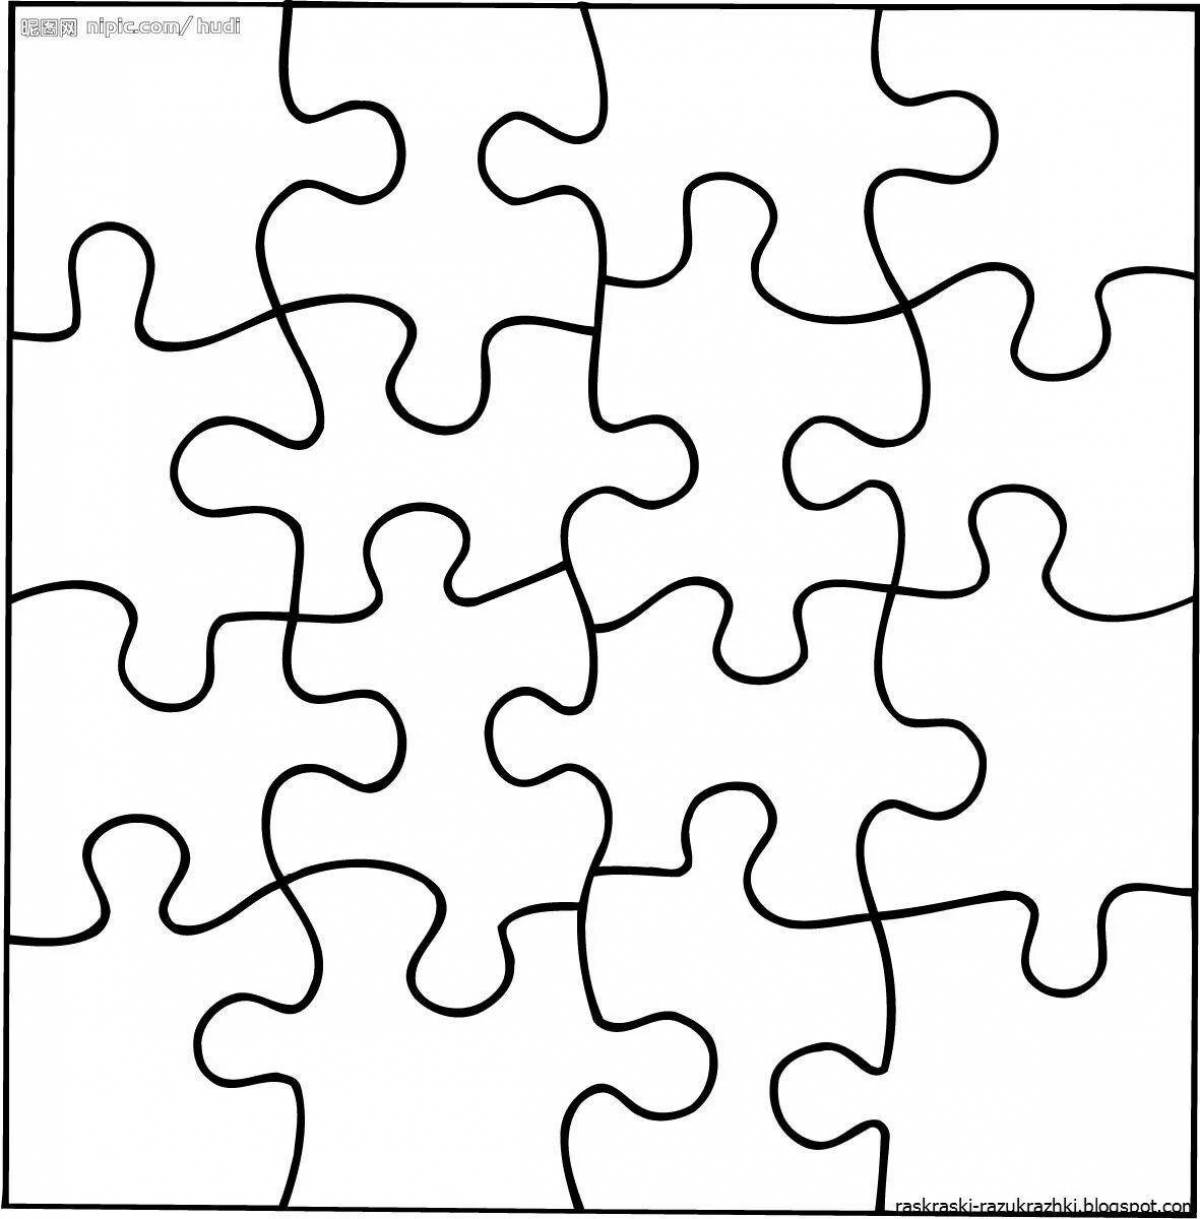 Encouragement coloring in games for children 5 years old puzzles